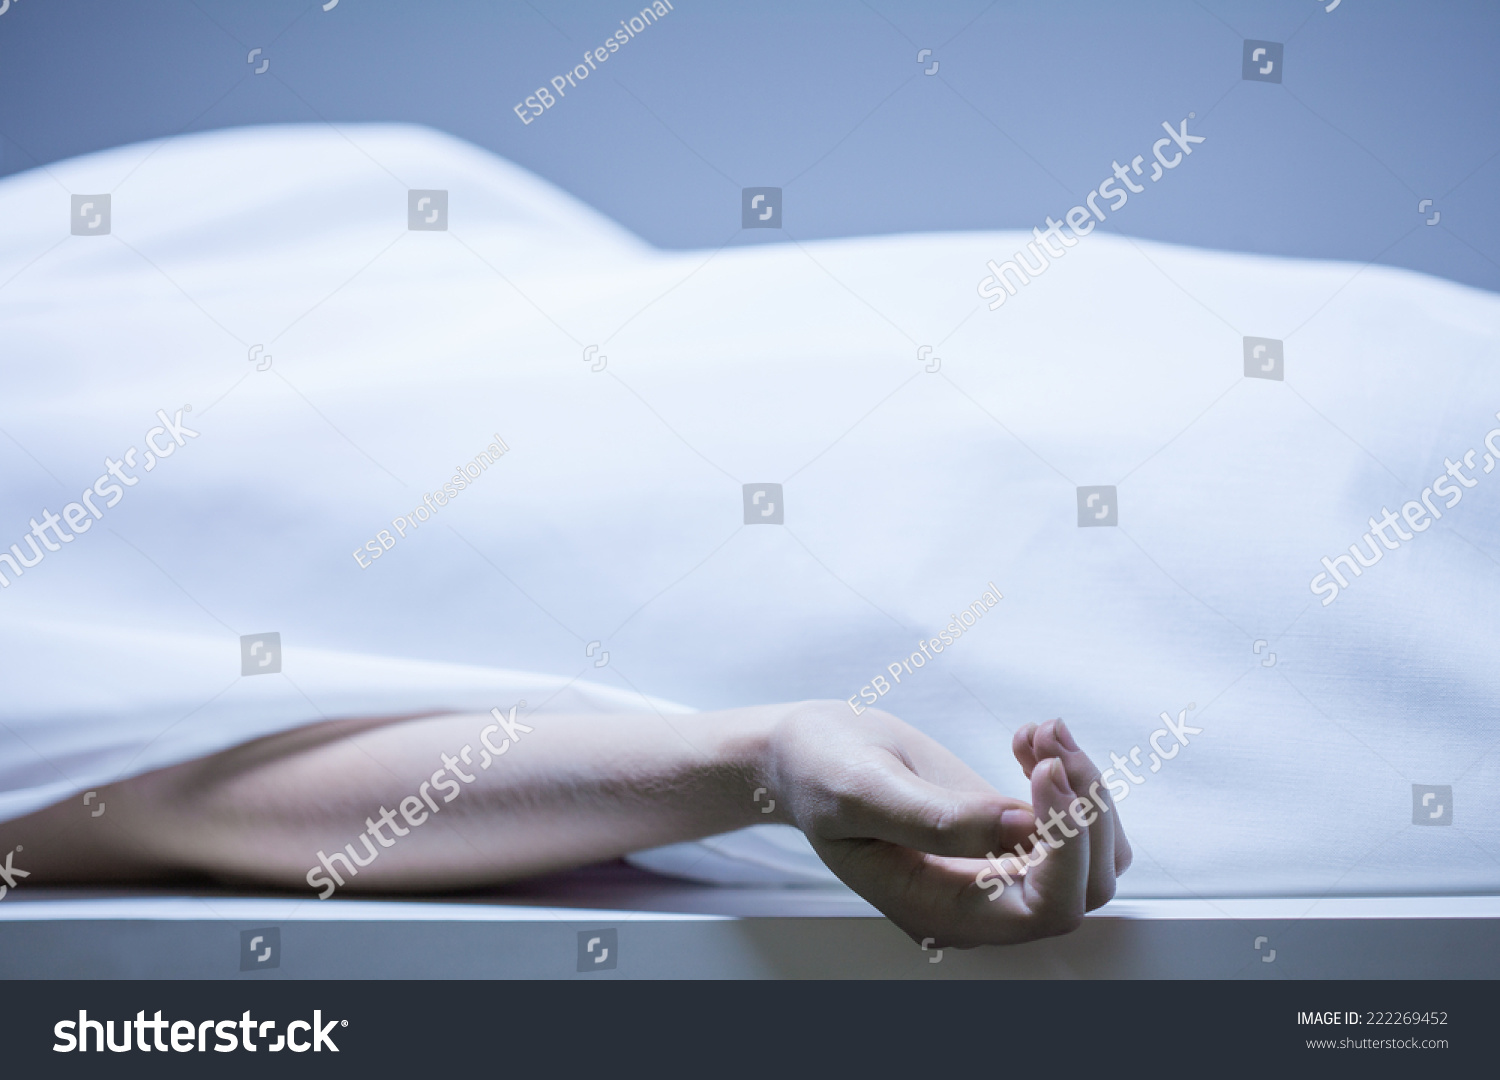 Remains of person in the morgue, horizontal #222269452